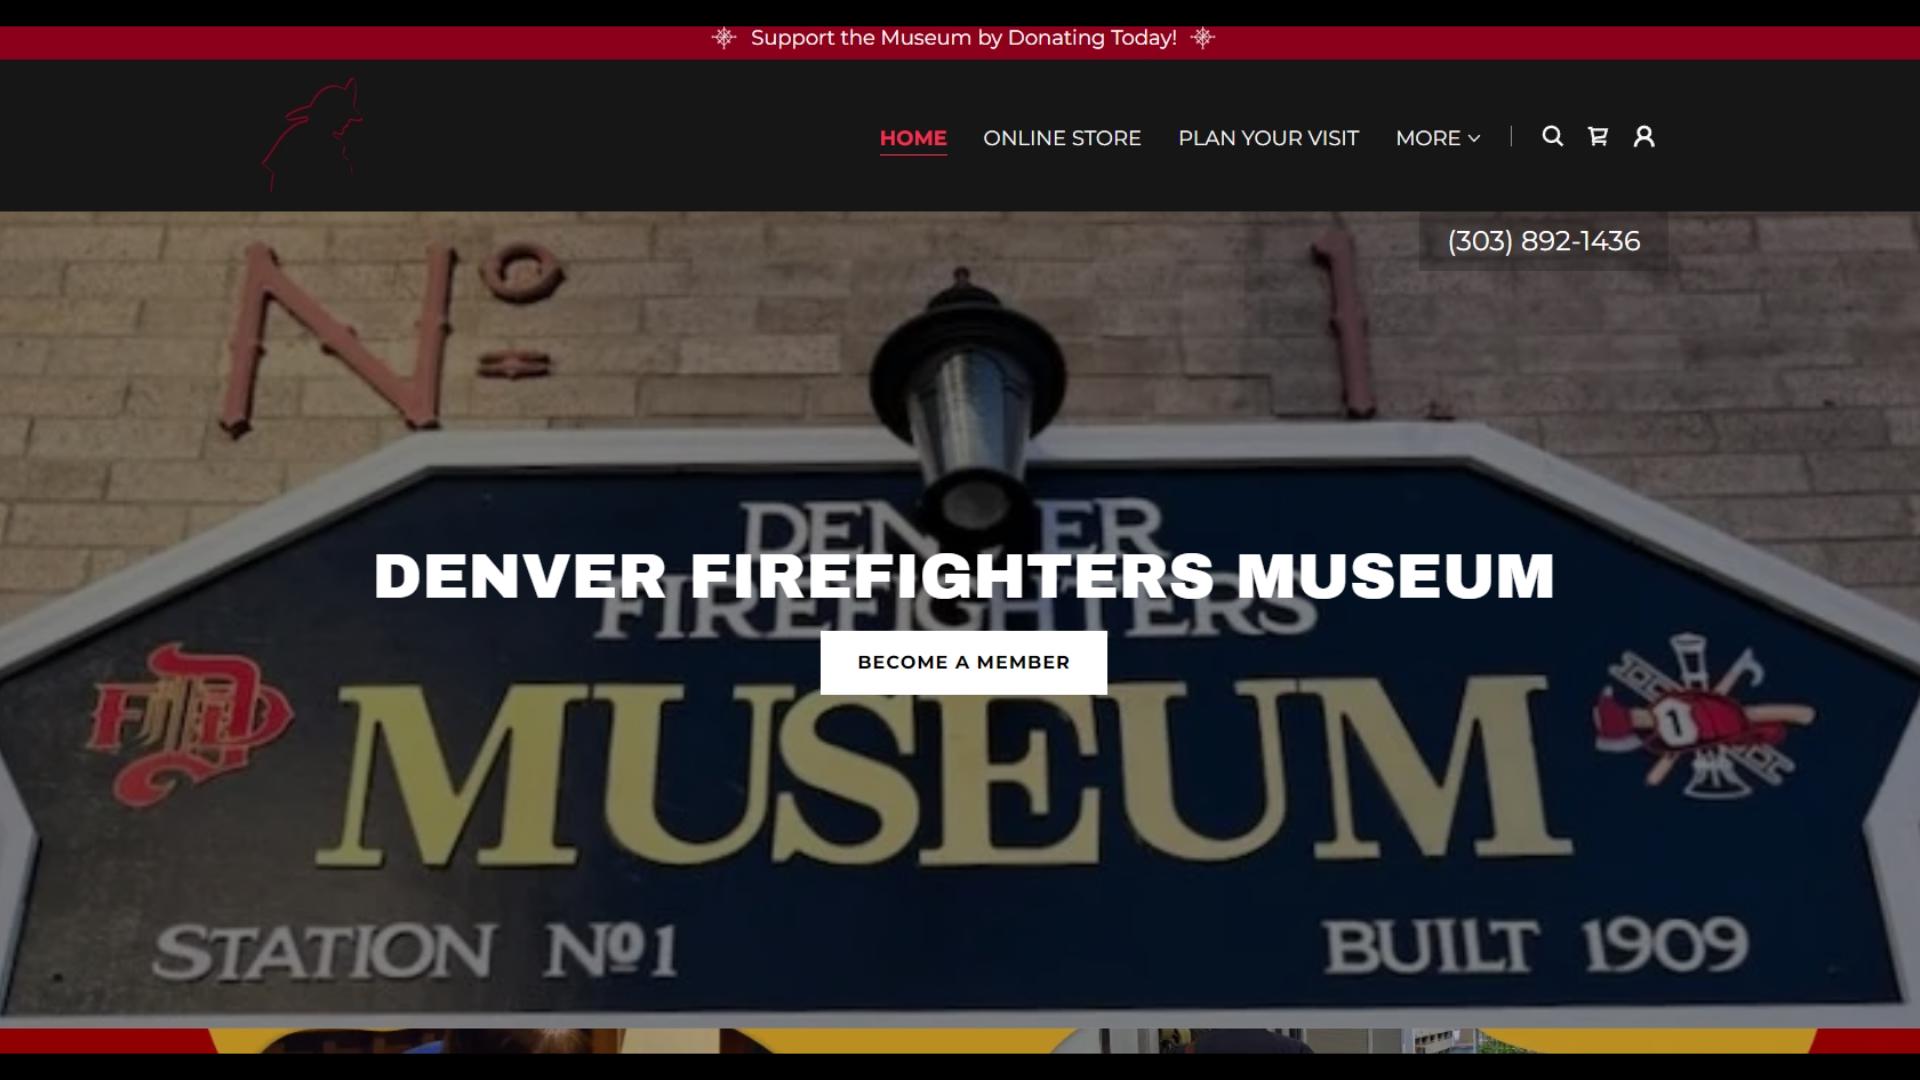 Find a full list of programs and happenings at the Denver Firefighters Museum at DenverFireFightersMuseum.org.